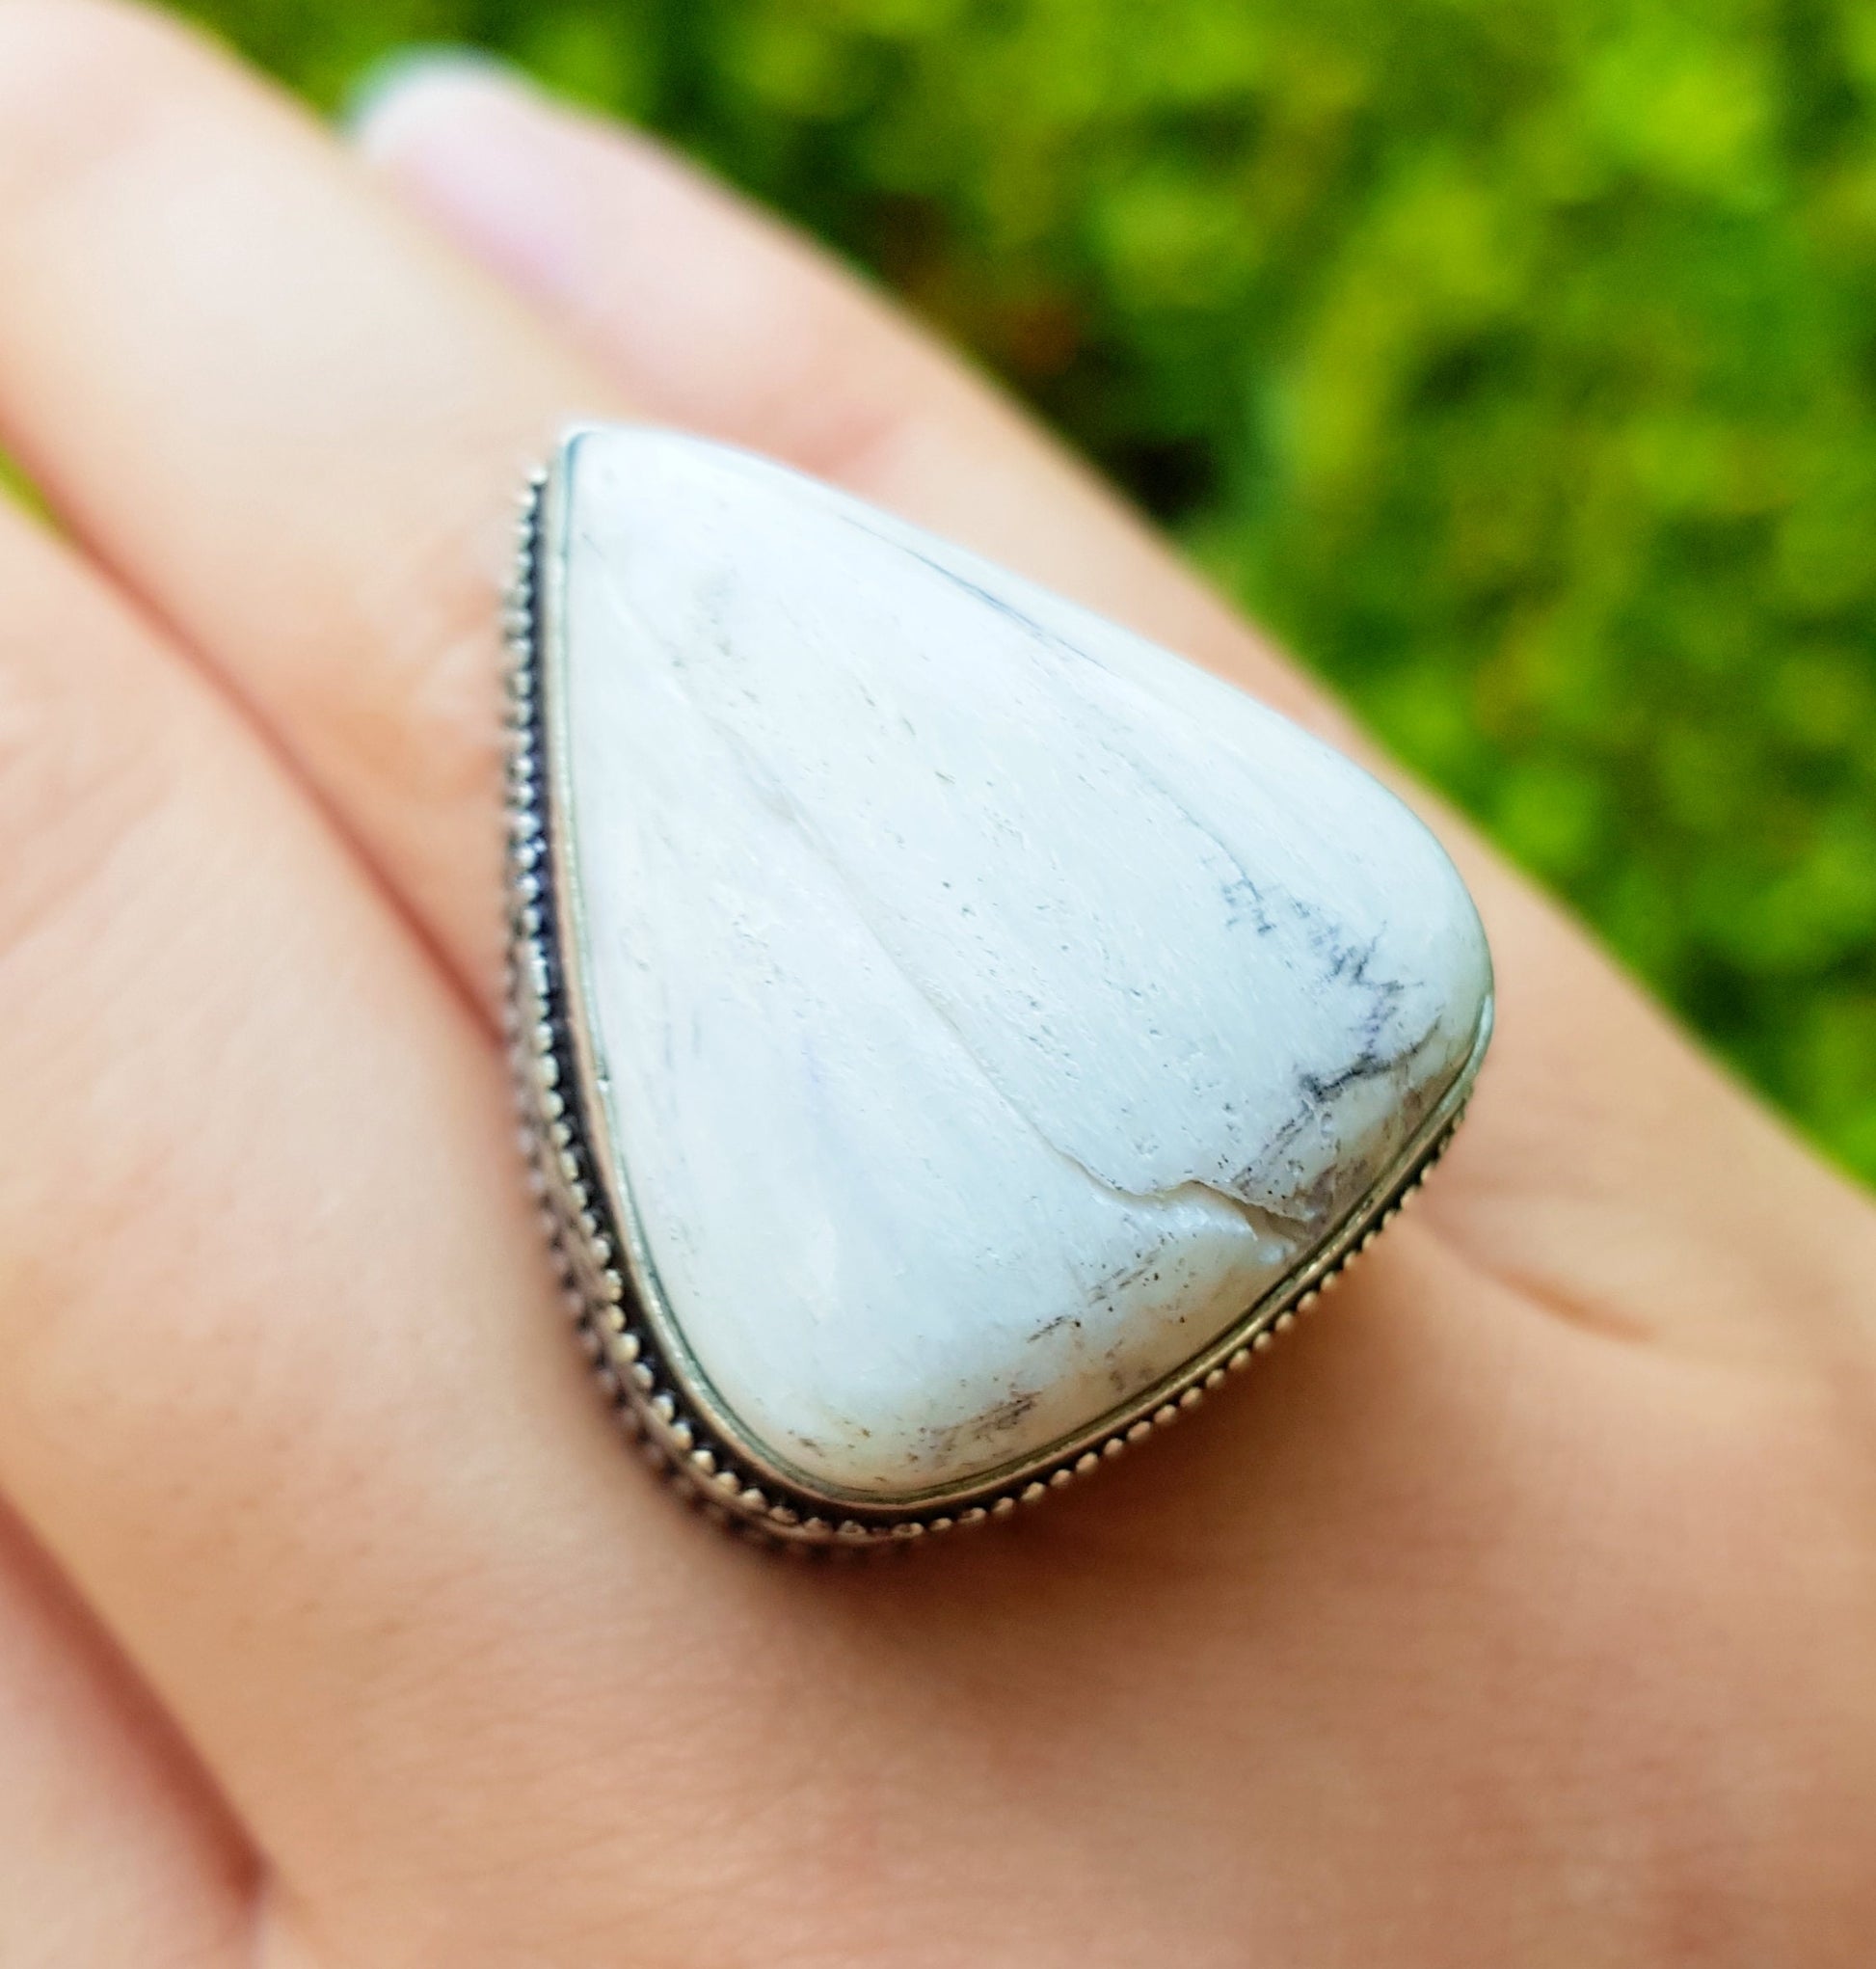 White Agate Ring In Sterling Silver SizeUS 6 1/2 Statement Ring Unique Gift Teardrop Ring GypsyJewelry